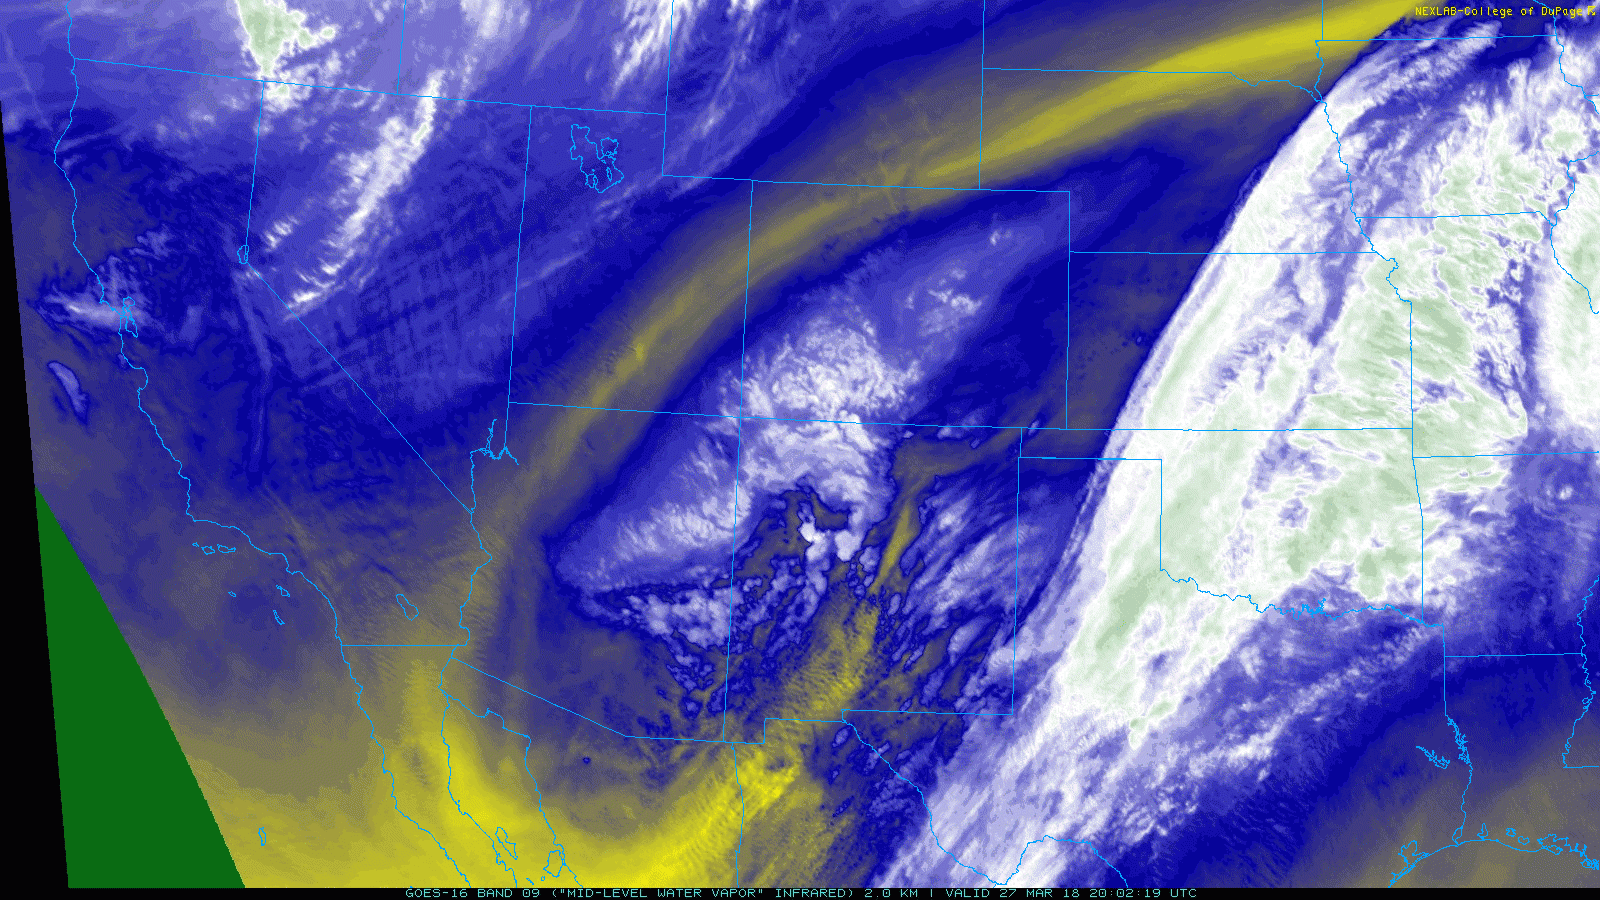 Water vapor imagery captured between 3:02 pm and 3:47 pm on 27 March 2018. 